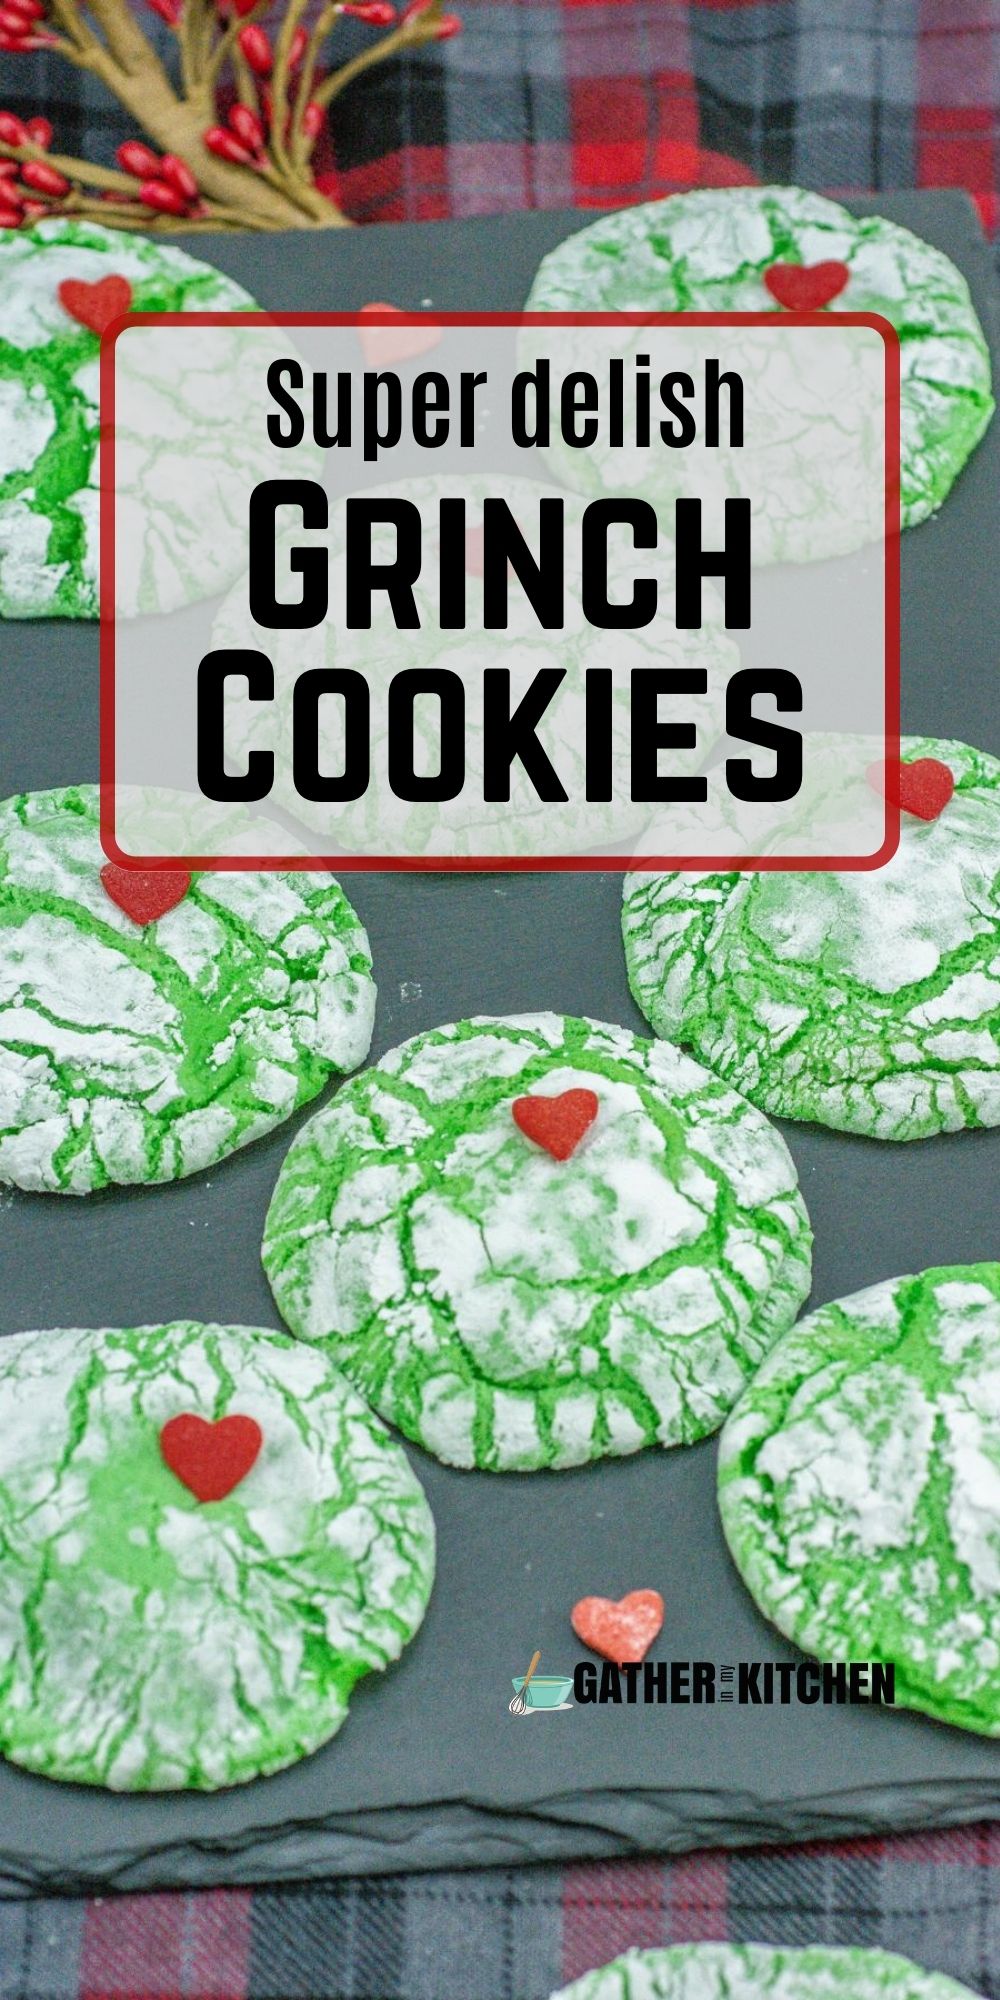 Pin image: top says "Super delish Grinch Cookies" and background is a plate of cookies.